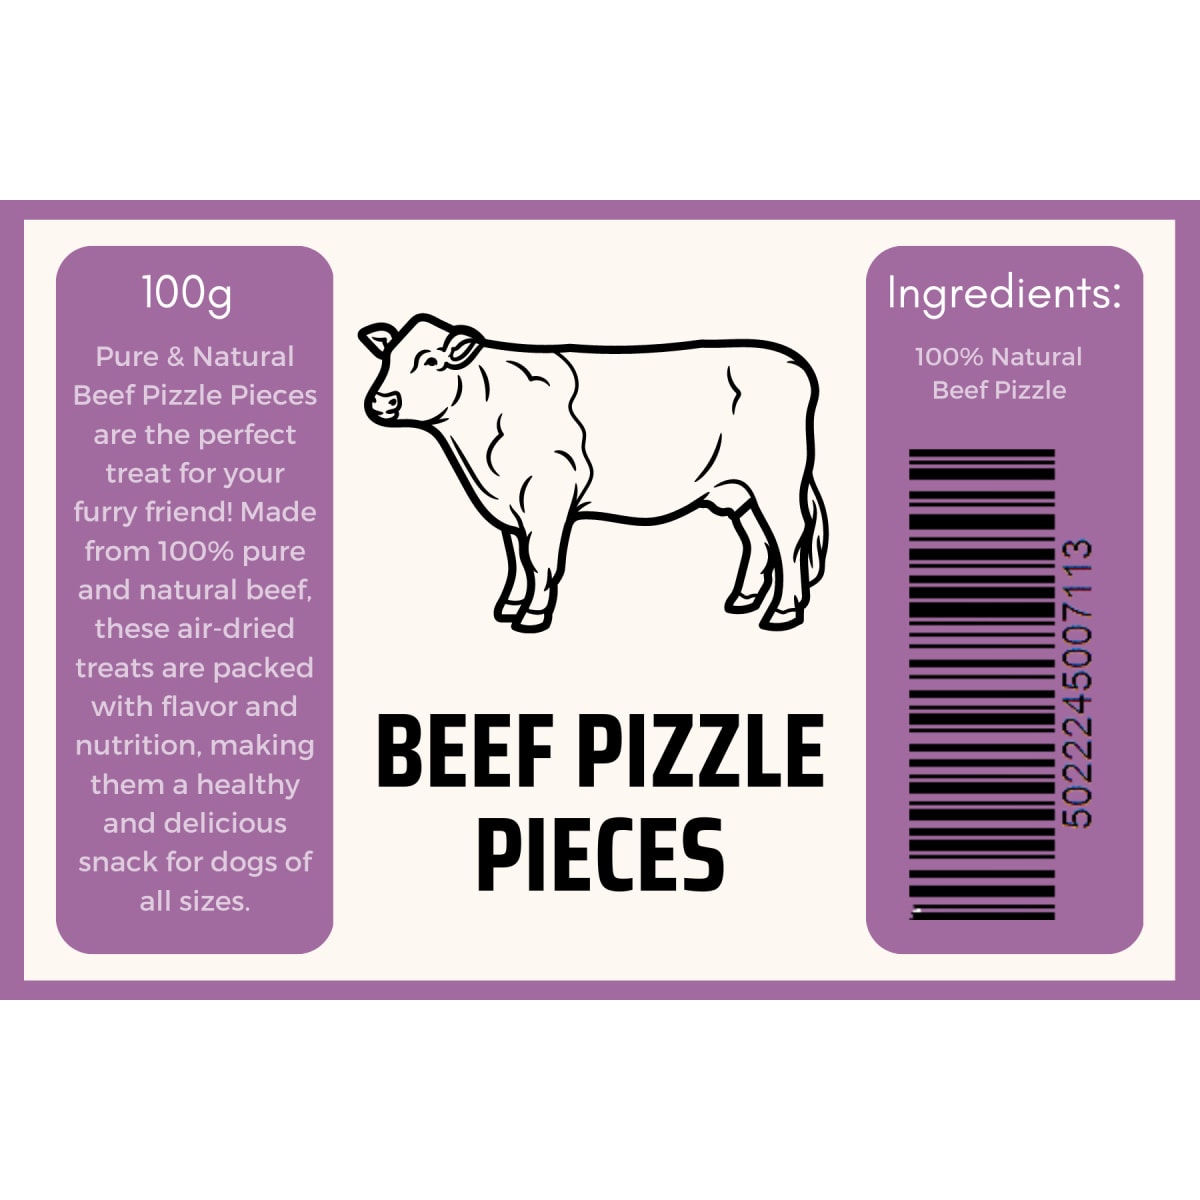 Beef Pizzle Pieces 100g Main Image